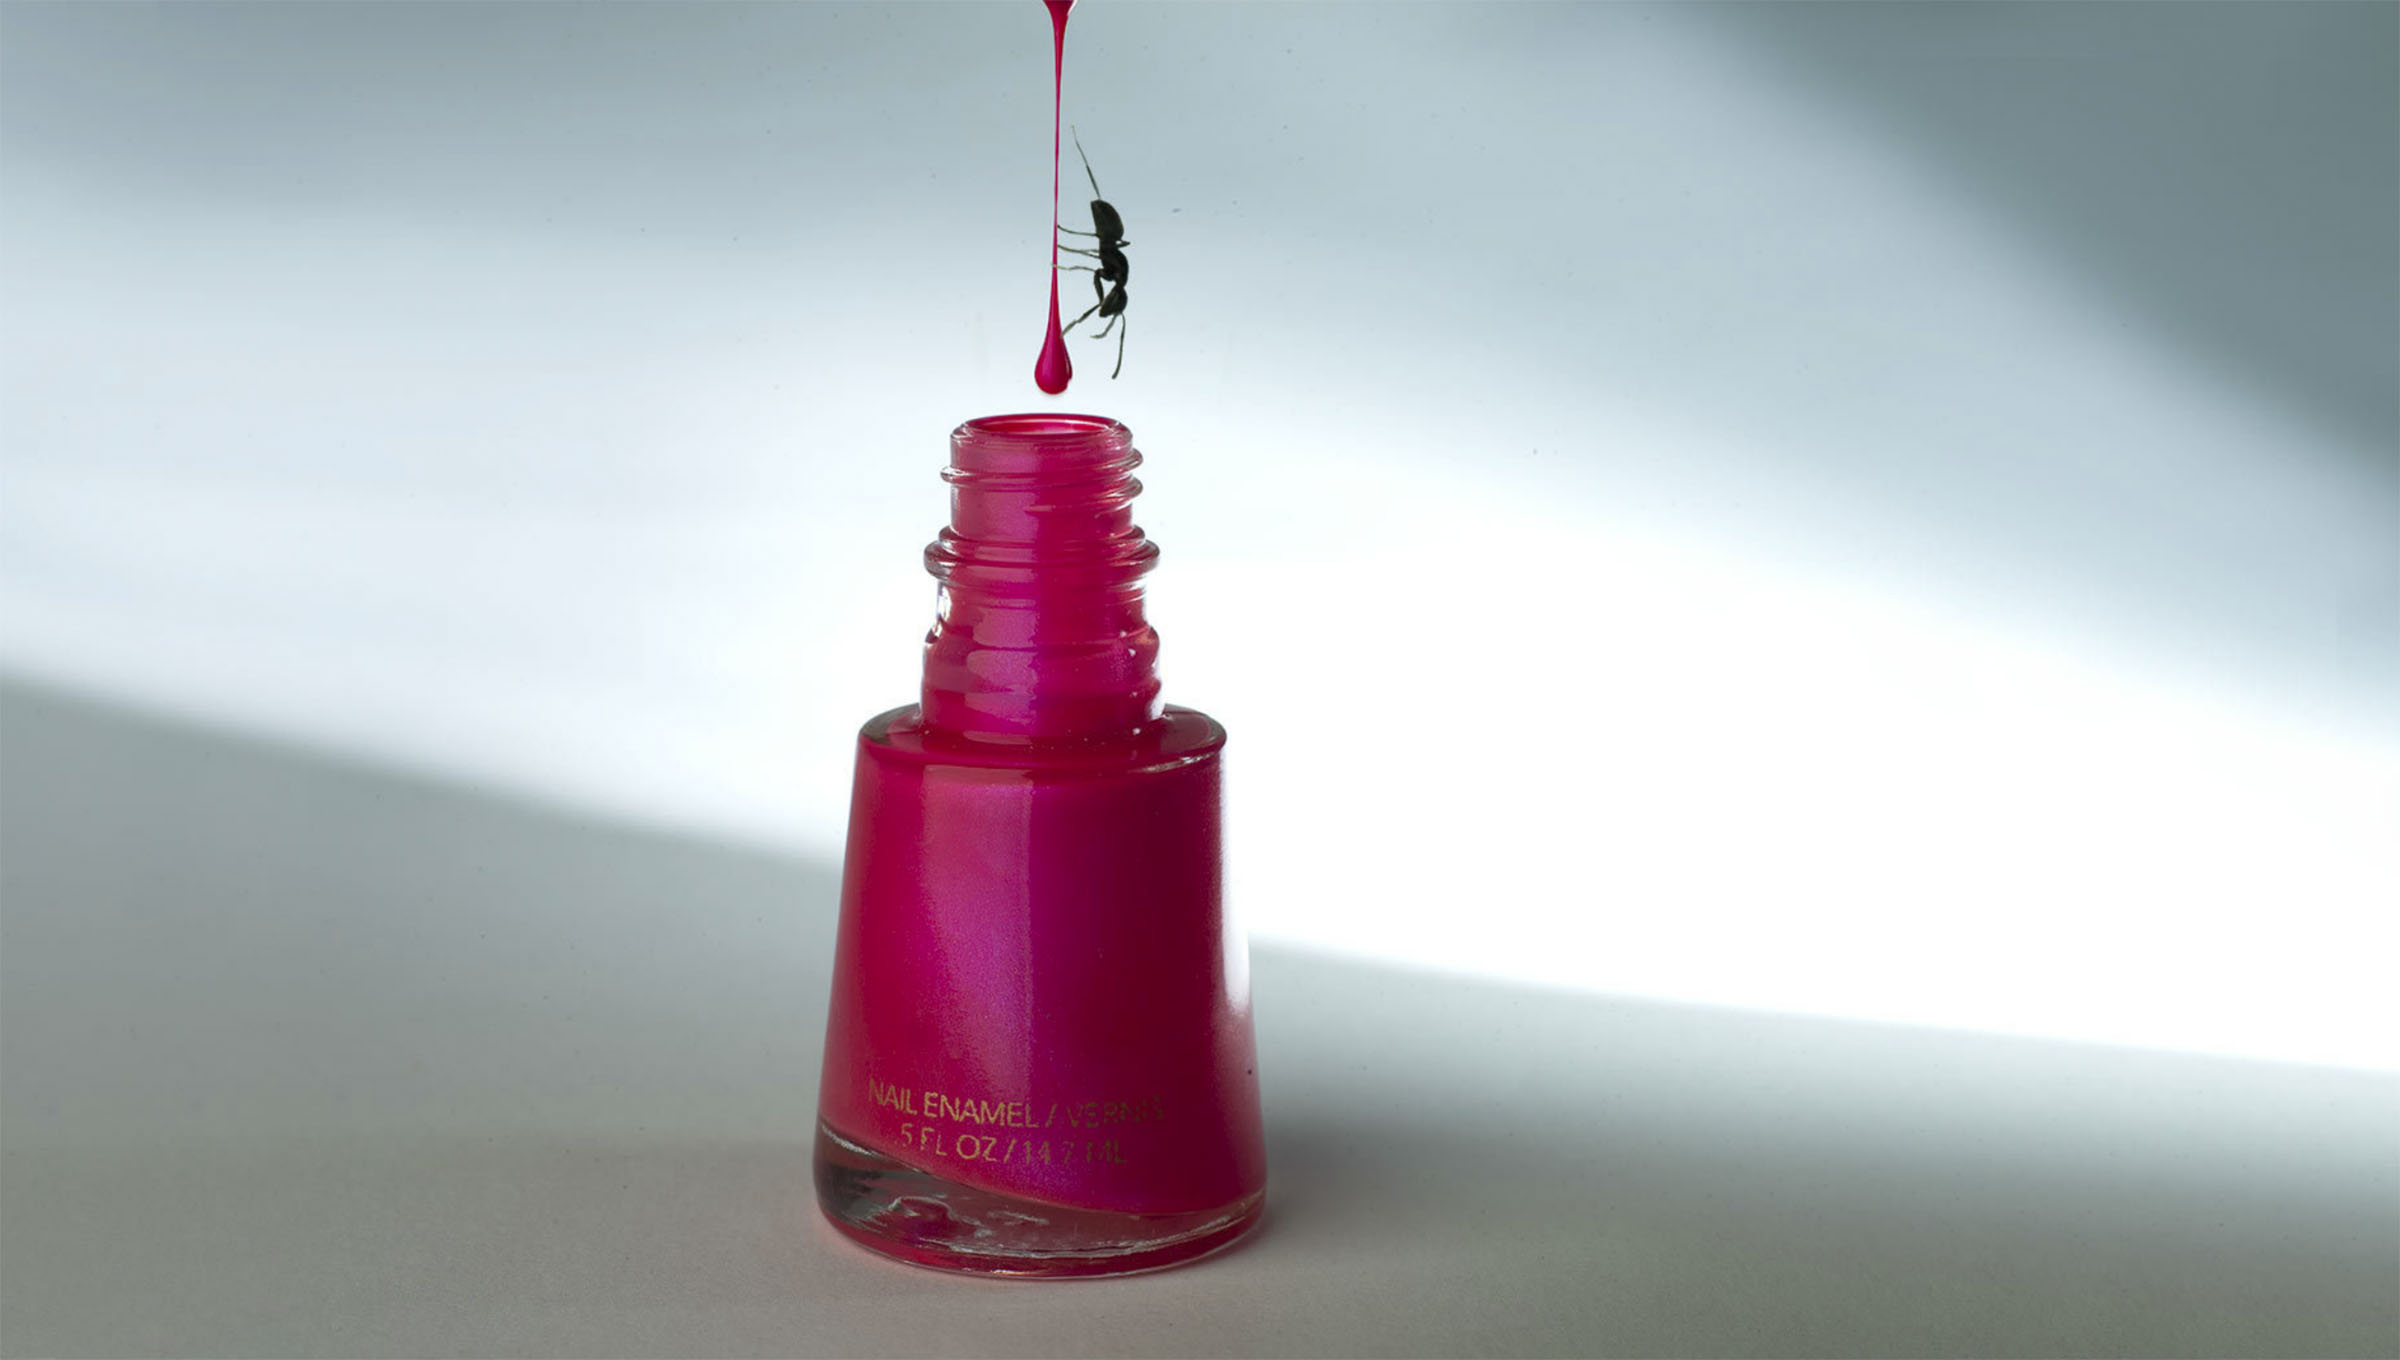 Lady Revlon Nail Polish Enamel, Product Photography with Ant Climbing Down lustrous drip drop By Wick Beavers creative advertising product Photographer NYC LA Rome Paris London